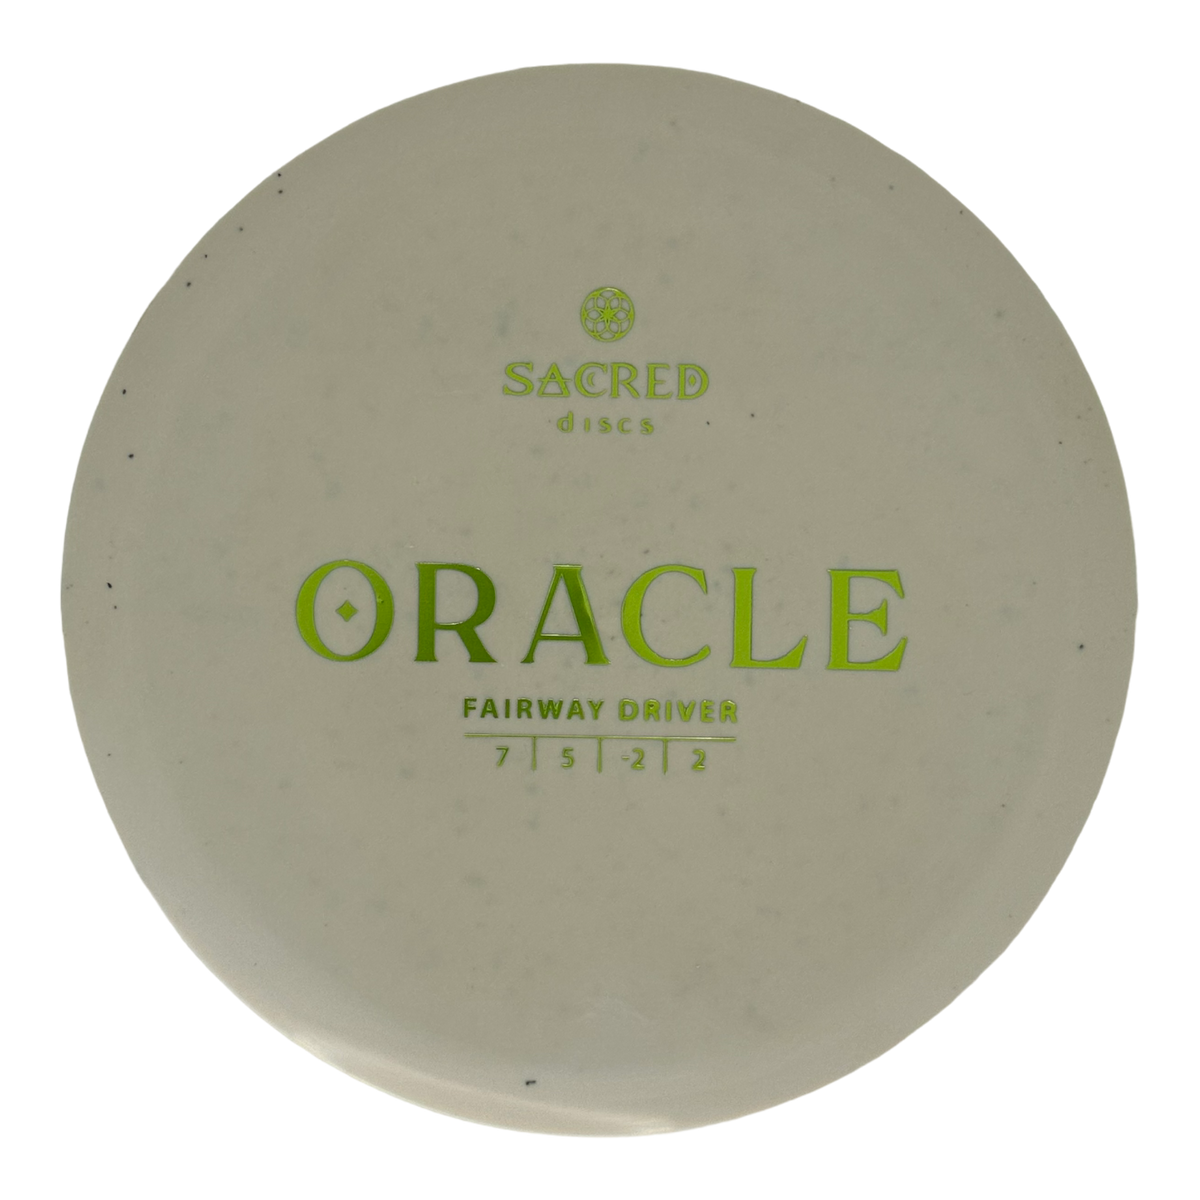 Sacred Discs Aroma Blend Oracle - First Run